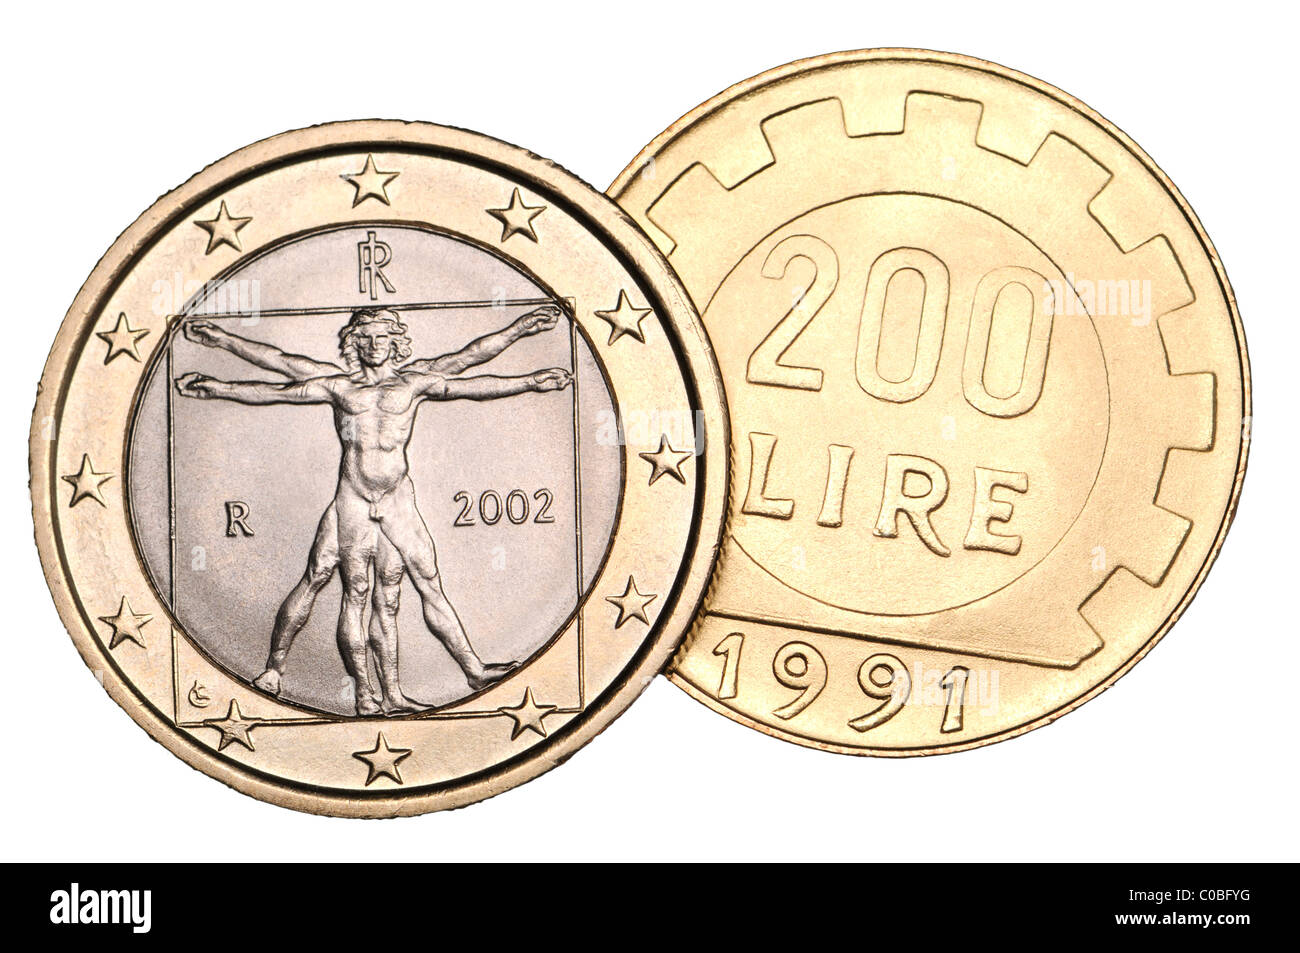 Italian 1 Euro coin from 2002 and 200 Lire coin from 1991 Stock Photo -  Alamy